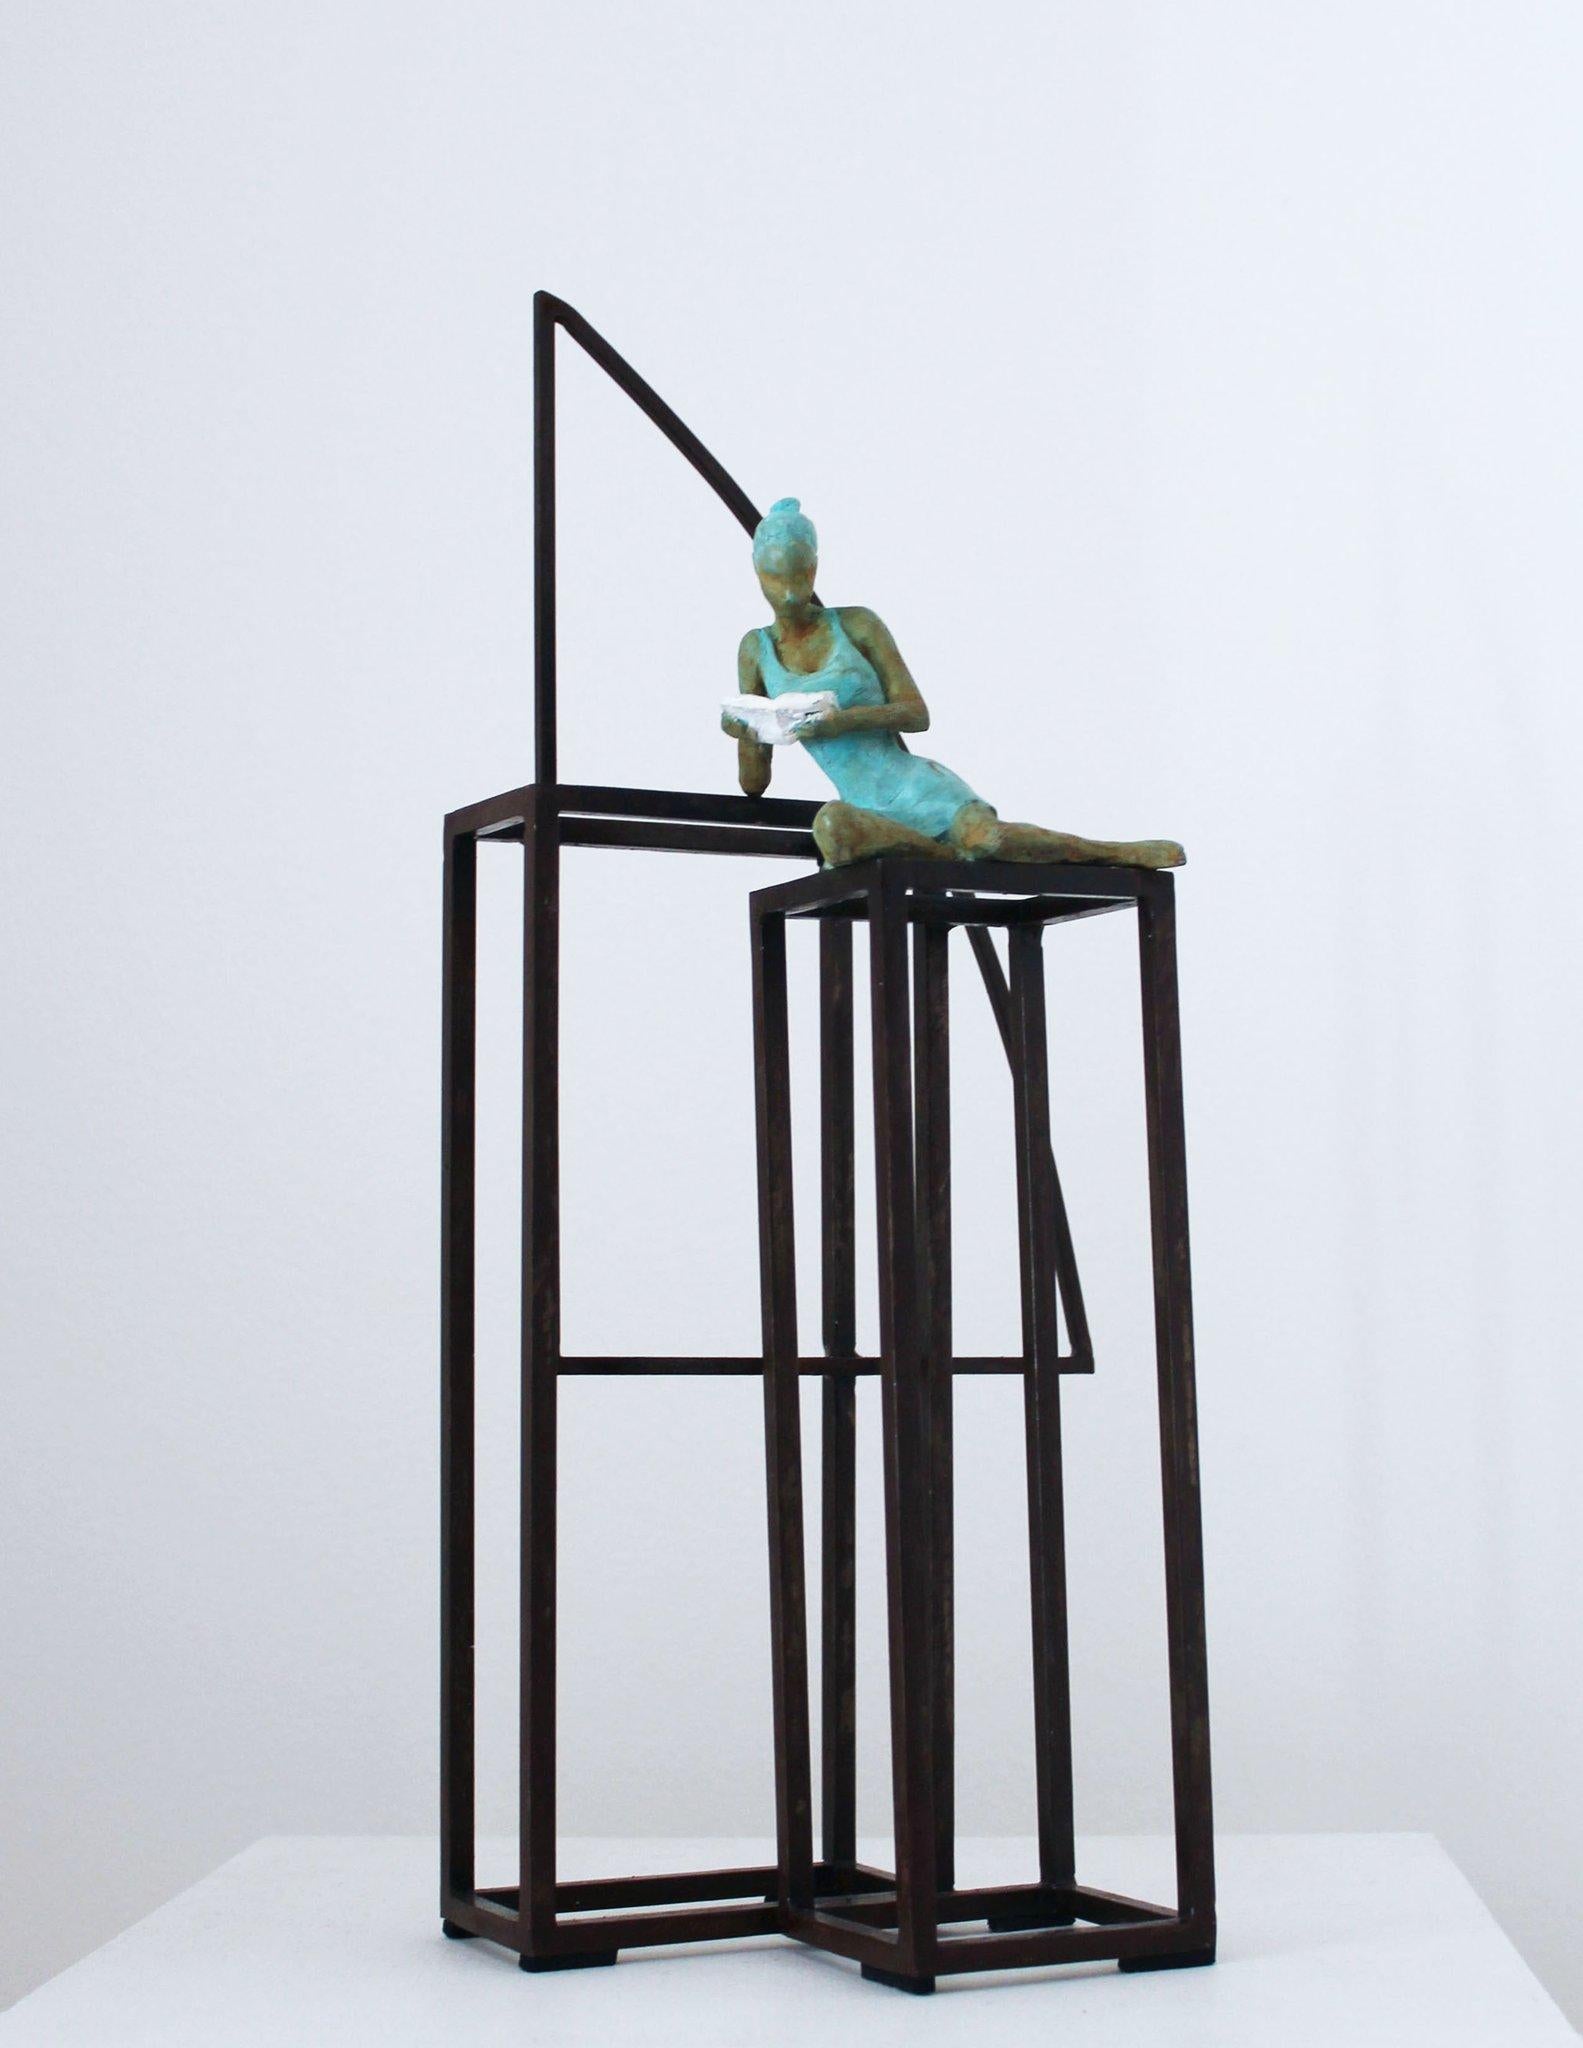 Literature is a bronze sculpture with green patina, it is connected to a steel base. The edition size is 50. This is a mural sculpture and can stand on a surface. Joan captures the mood of a girl enjoying moment of freedom and time with herself